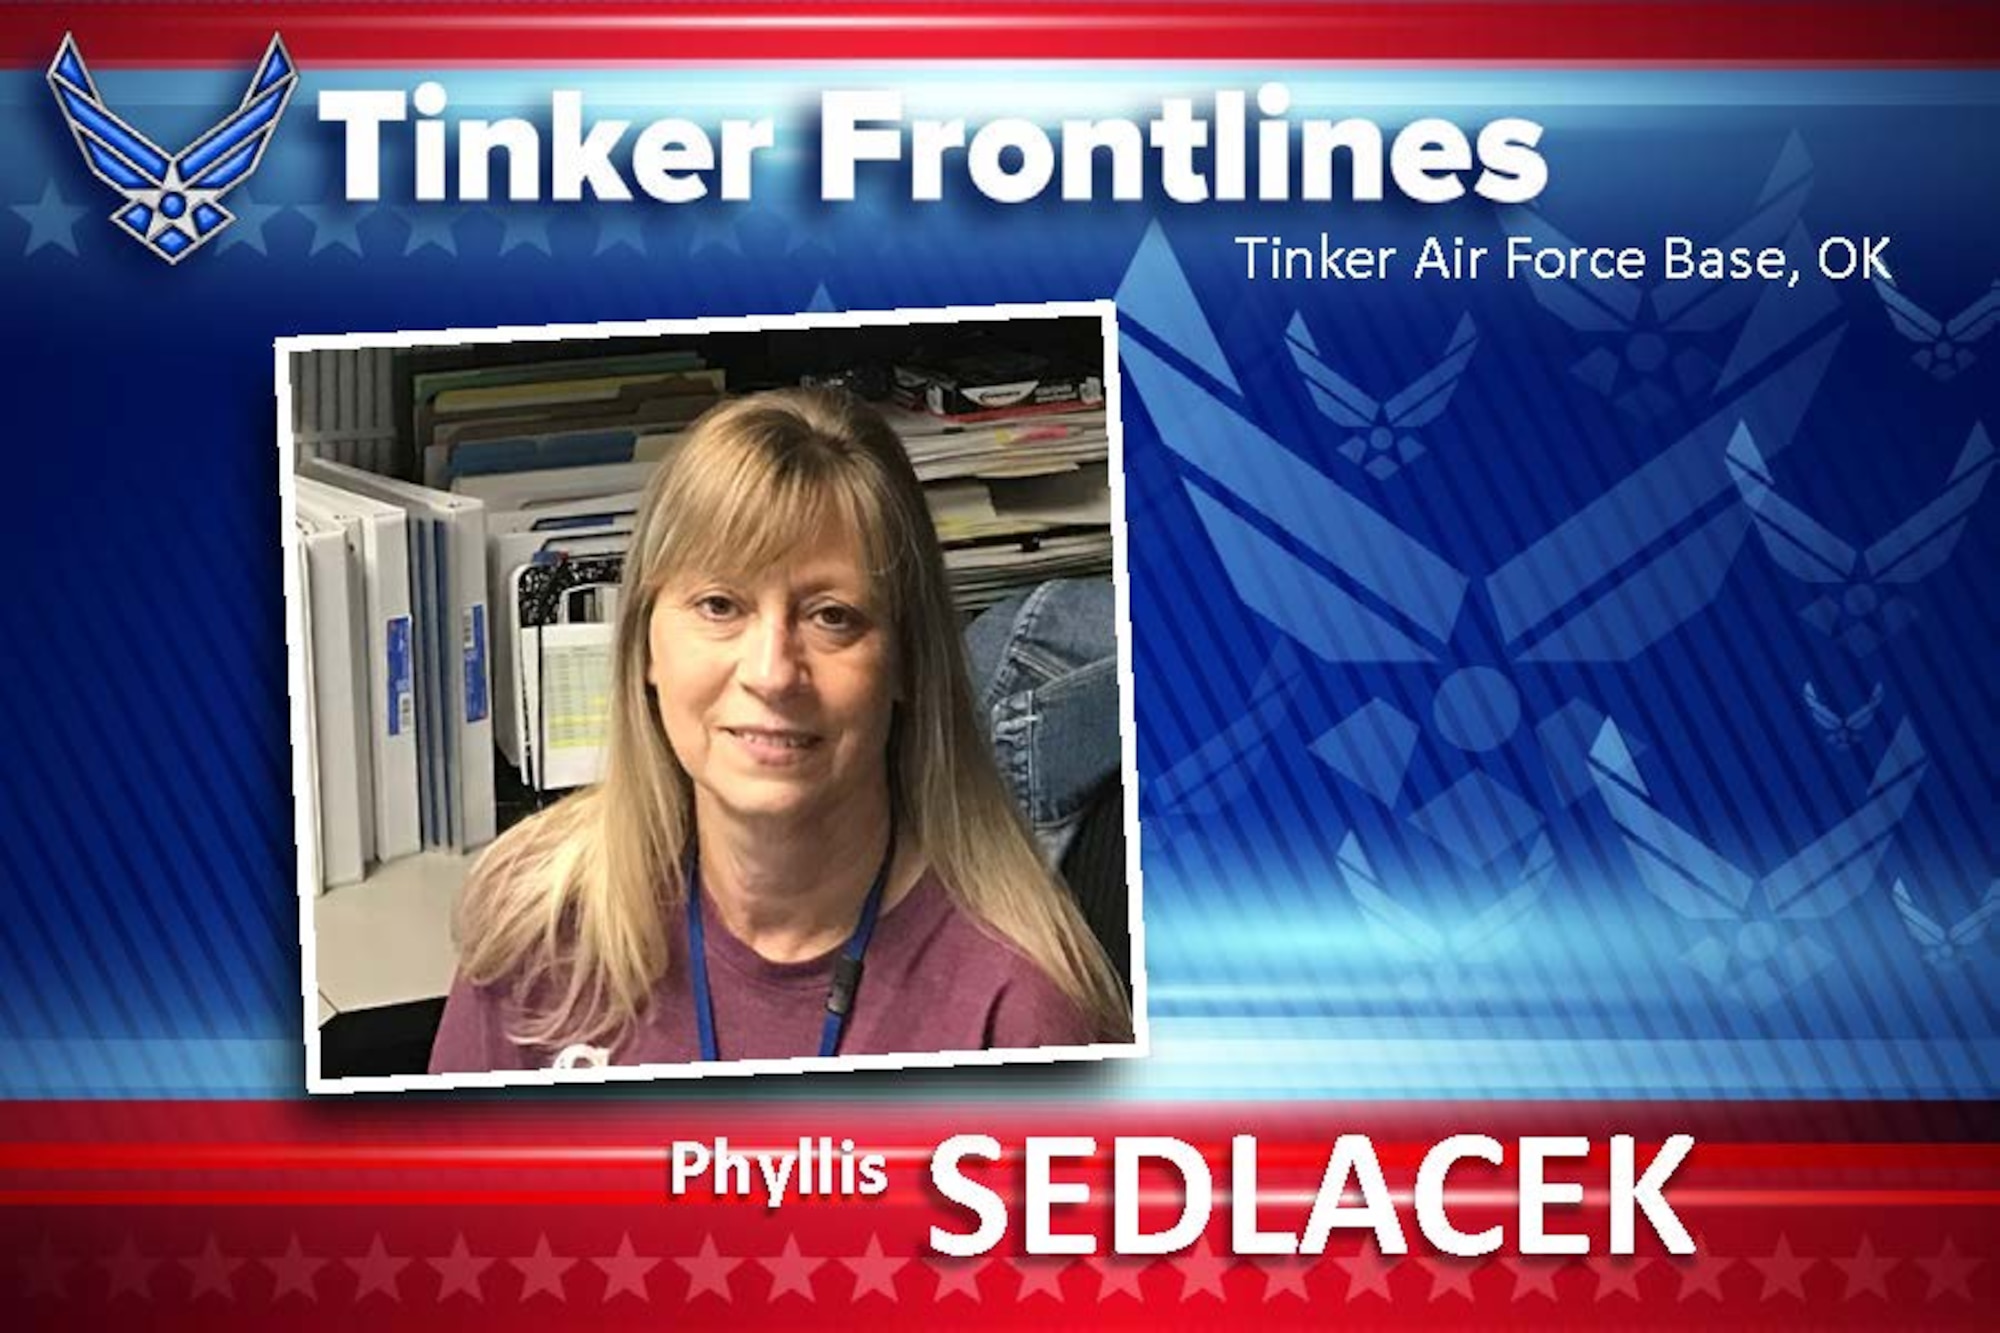 Phyllis J. Sedlacek, a management and program analyst in the 76th Propulsion Maintenance Group, plays a vital role in providing assistance and guidance to group leadership with regard to employee hiring.  Her efforts ensure that the 76th PMXG hires the appropriate amount of personnel.